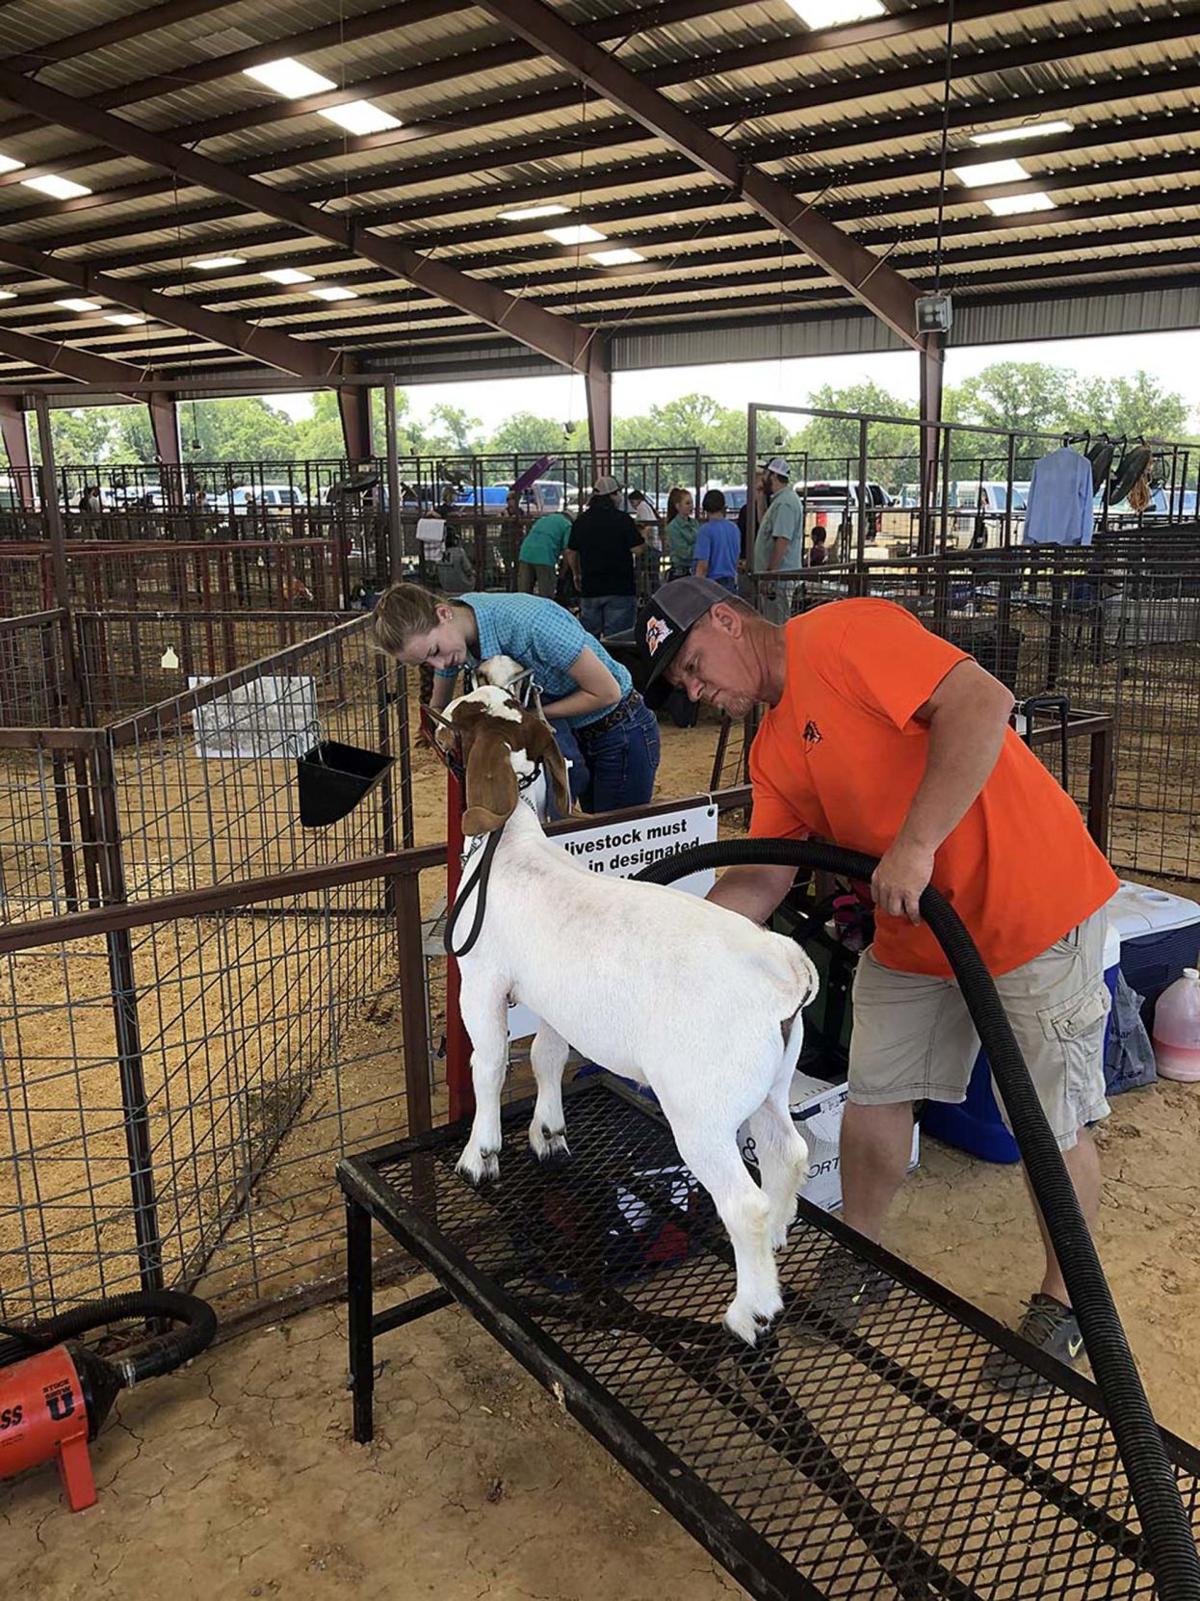 GALLERY Parker County Youth Livestock Show Monday Gallery